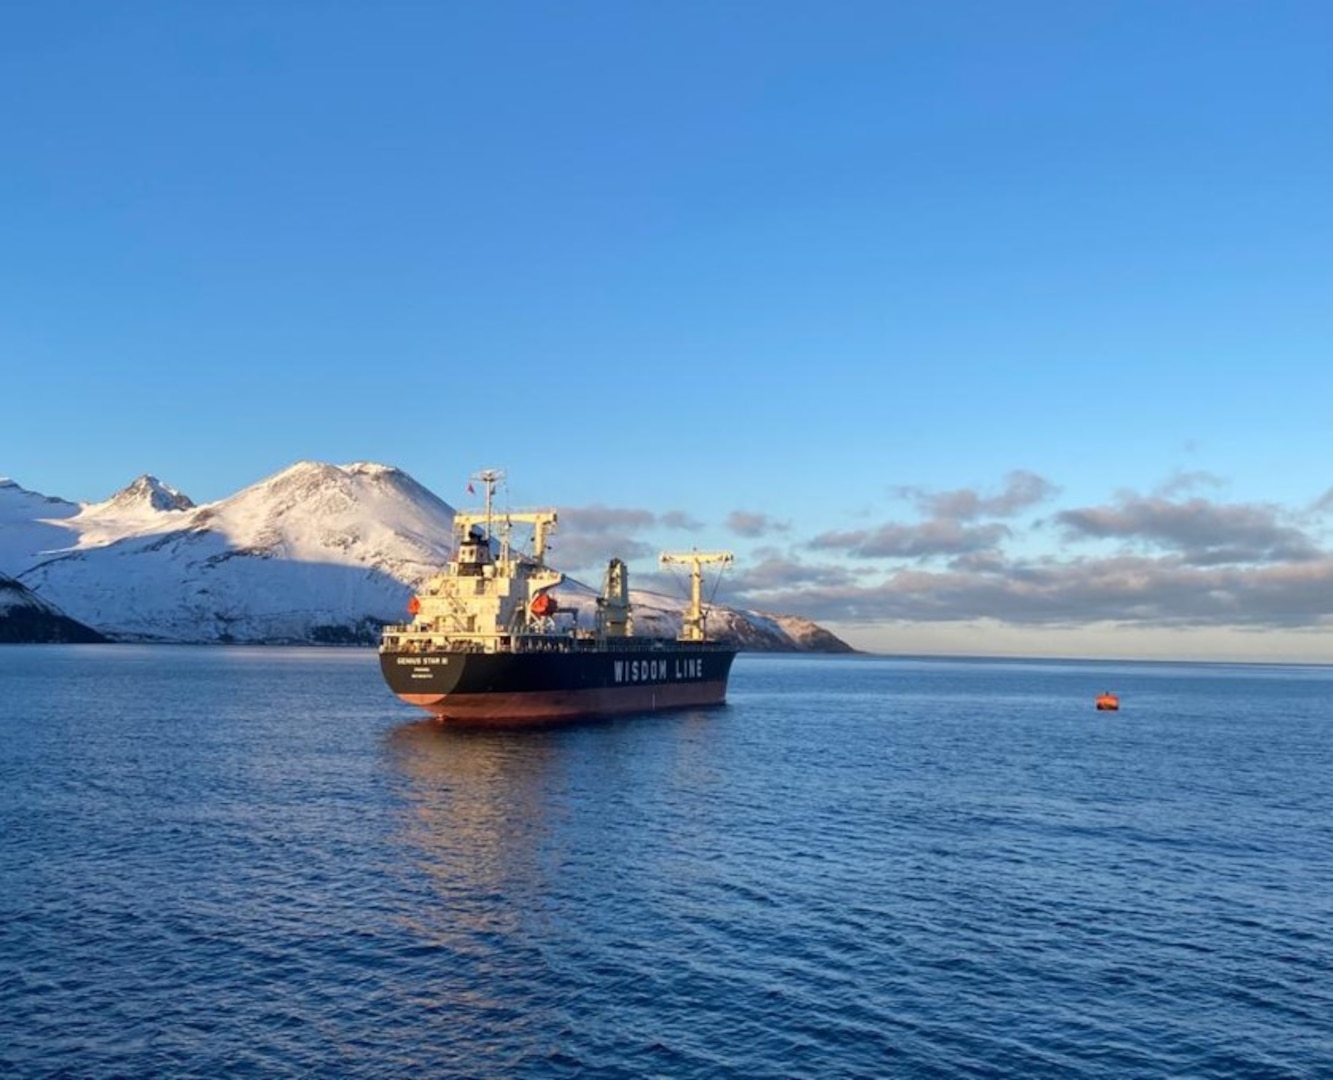 Response personnel utilized the Emergency Towing System aboard M/V Genius Star XI to connect to the mooring ball in Broad Bay, near Dutch Harbor, Alaska, Jan. 1, 2024. The M/V Genius Star XI remains stable. Assessment teams report air quality remains normal and there is no indication of heat in or around the cargo holds. Courtesy photo.